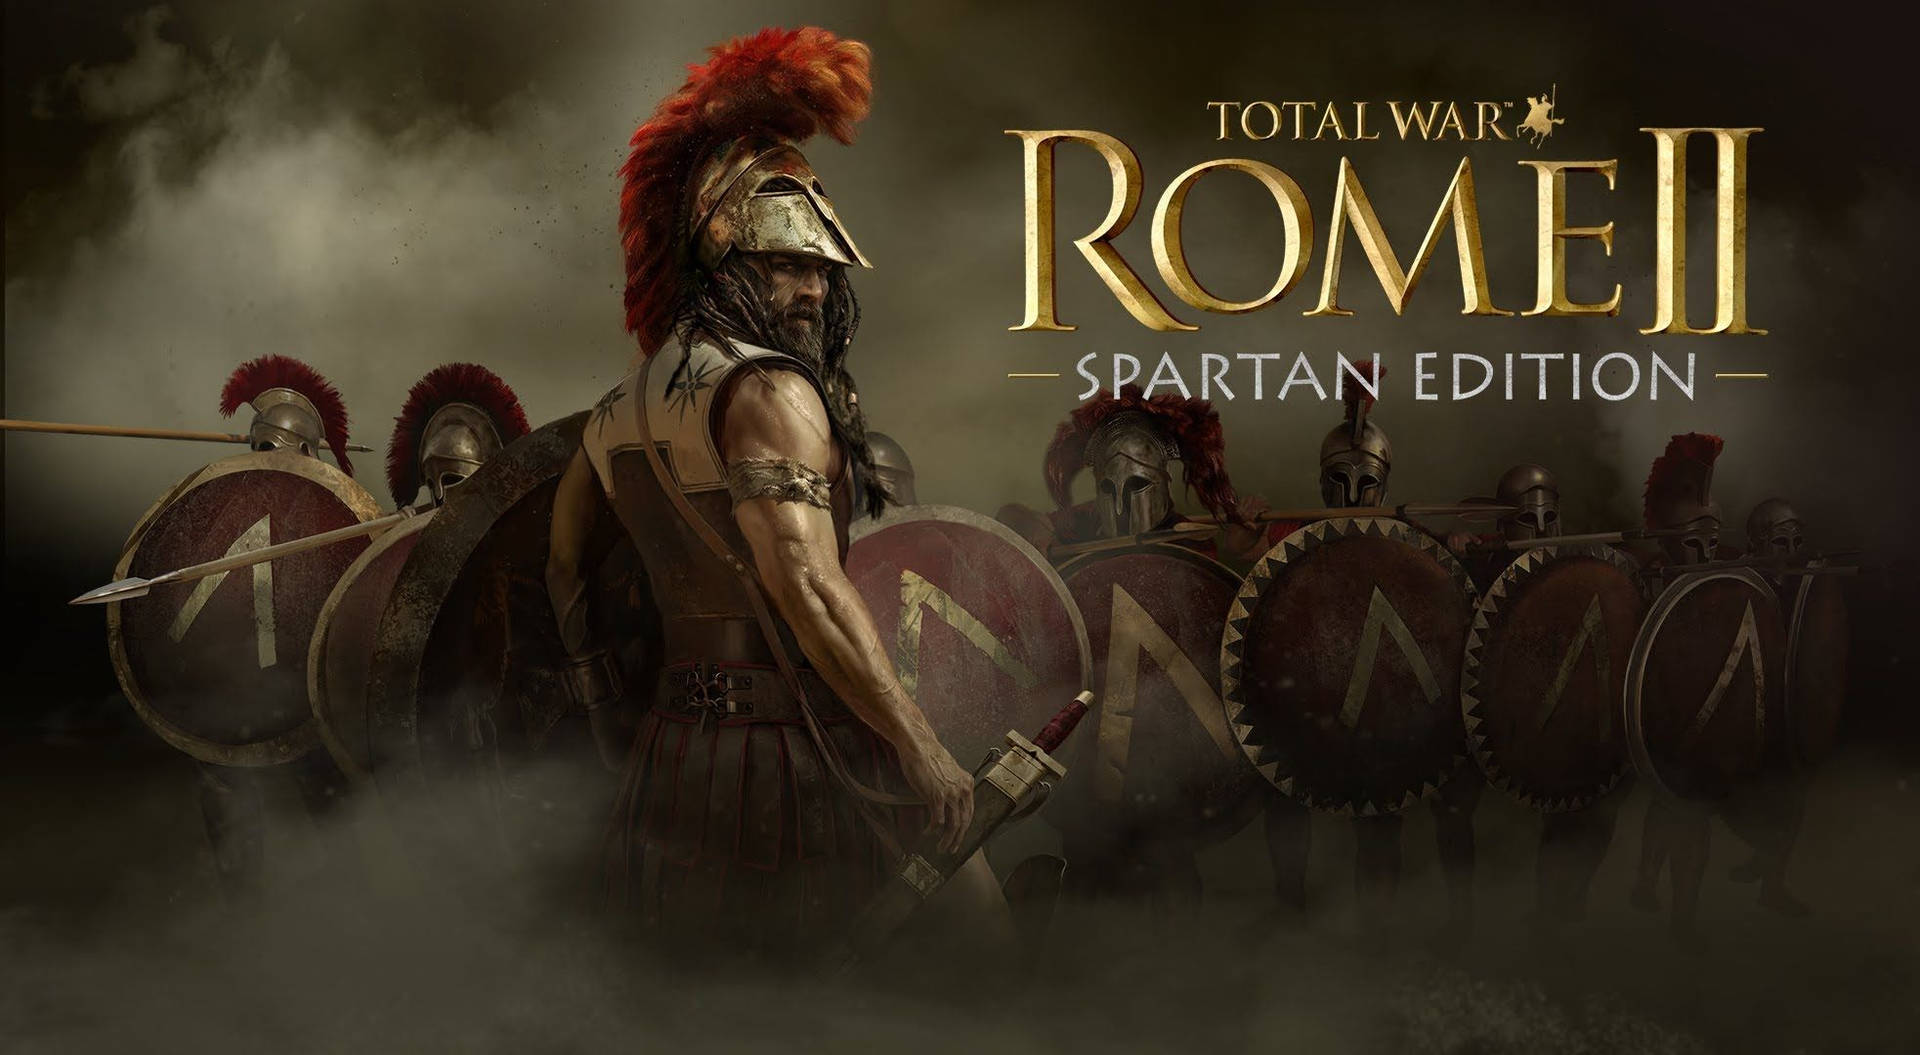 Rome 2 Spartan Edition Game Cover Background